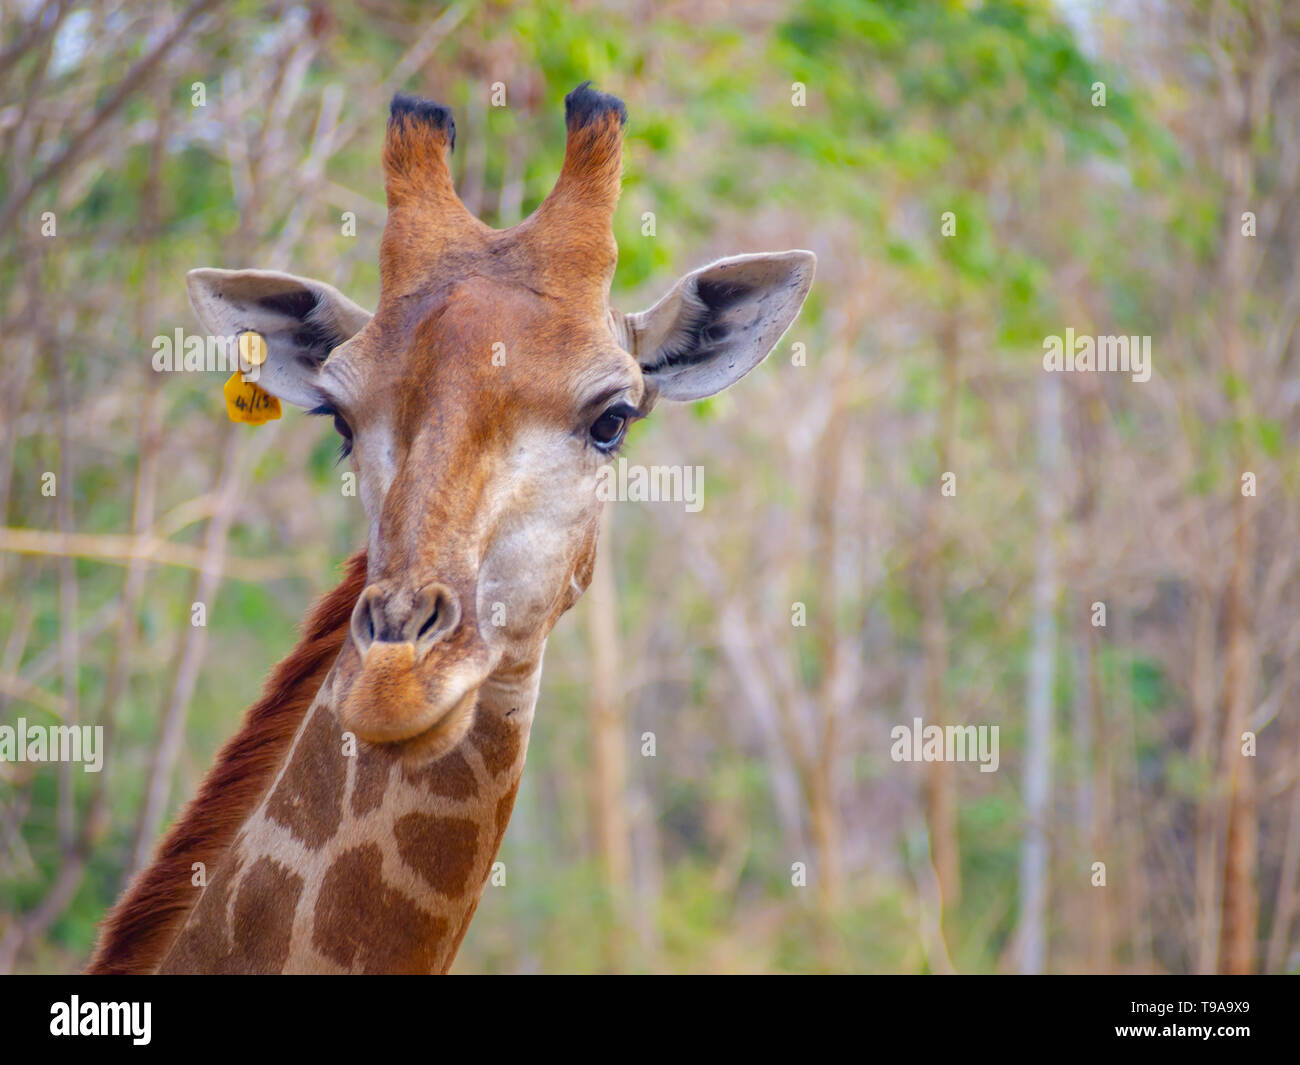 face head giraffe close up  have yellow tag on them ear  can see beautiful pattern  texture fur on neck zoo create natural background. Stock Photo